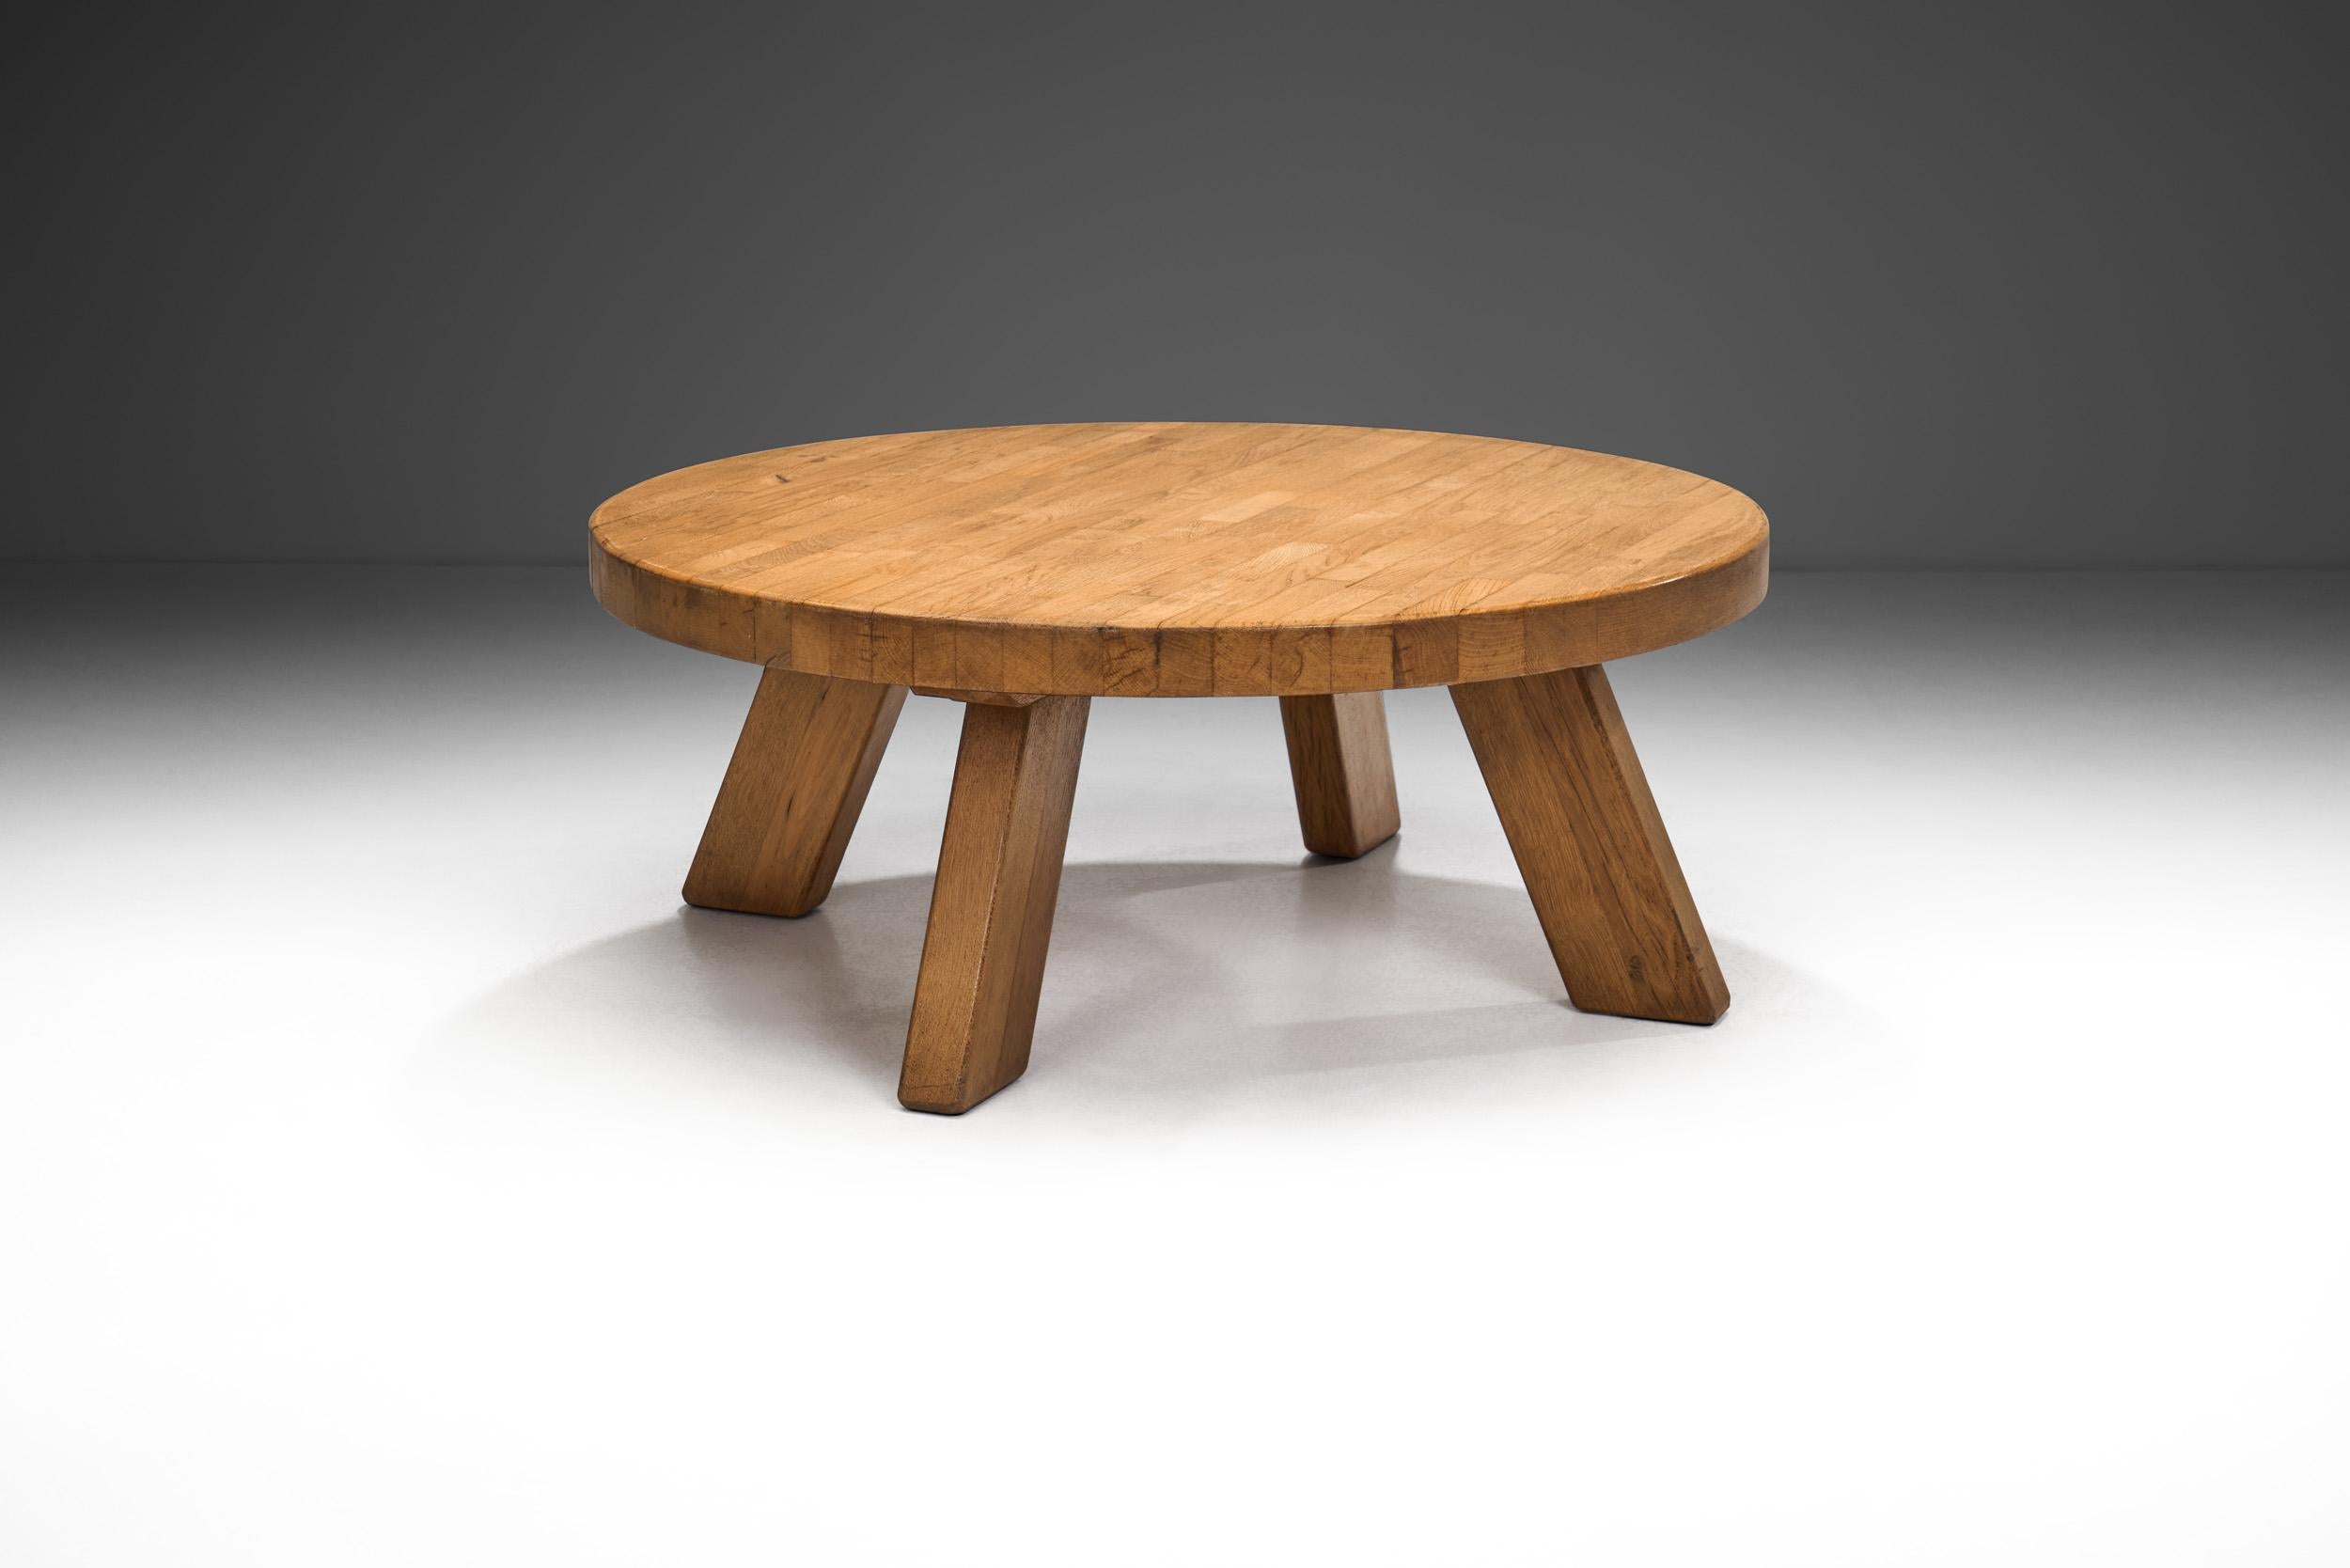 In European, and thus in Dutch mid-century furniture design, there was an early emphasis on wood as it connected everyday objects, such as furniture to nature. This rustic, solid oak coffee table is a perfect example of this sentiment, and the